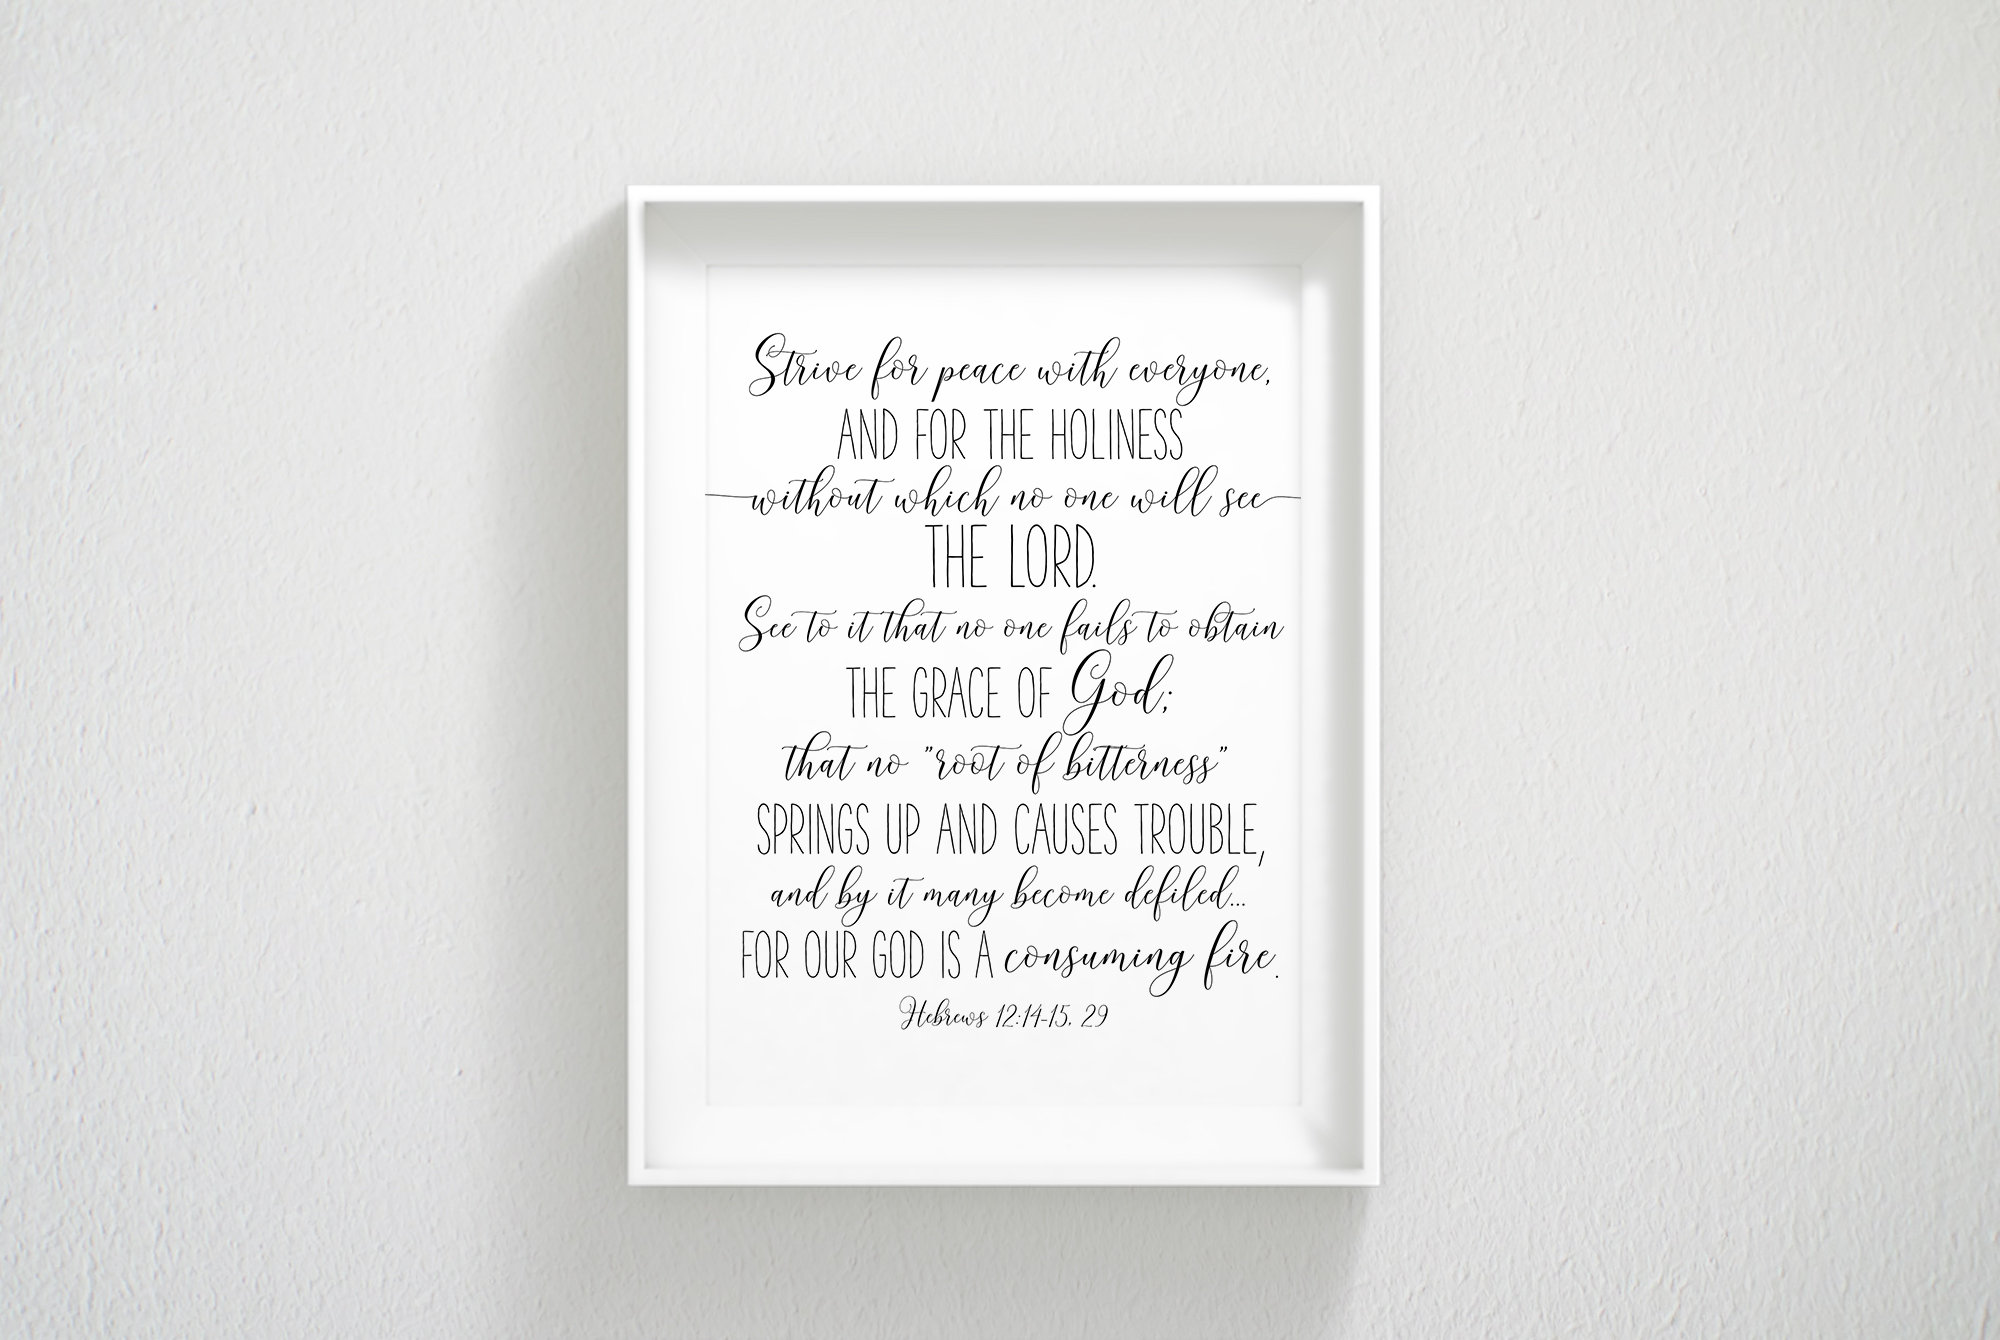 Strive For Piece For Everyone, Hebrews 12:14, Bible Verse Printable Wall Art,Nursery Bible Quotes